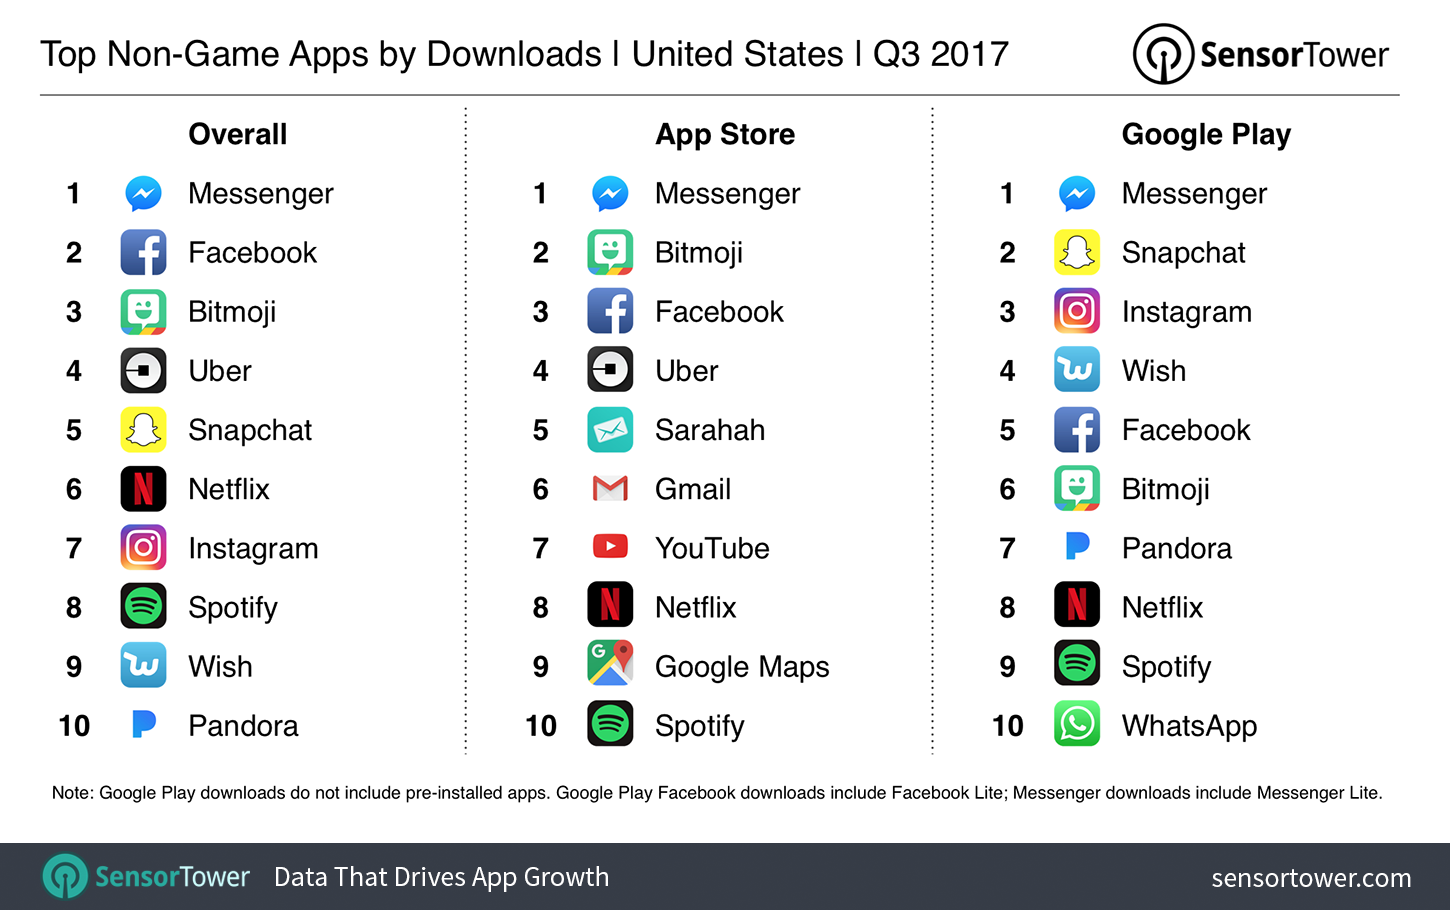 Q3 2017's Top Mobile Apps by United States Downloads